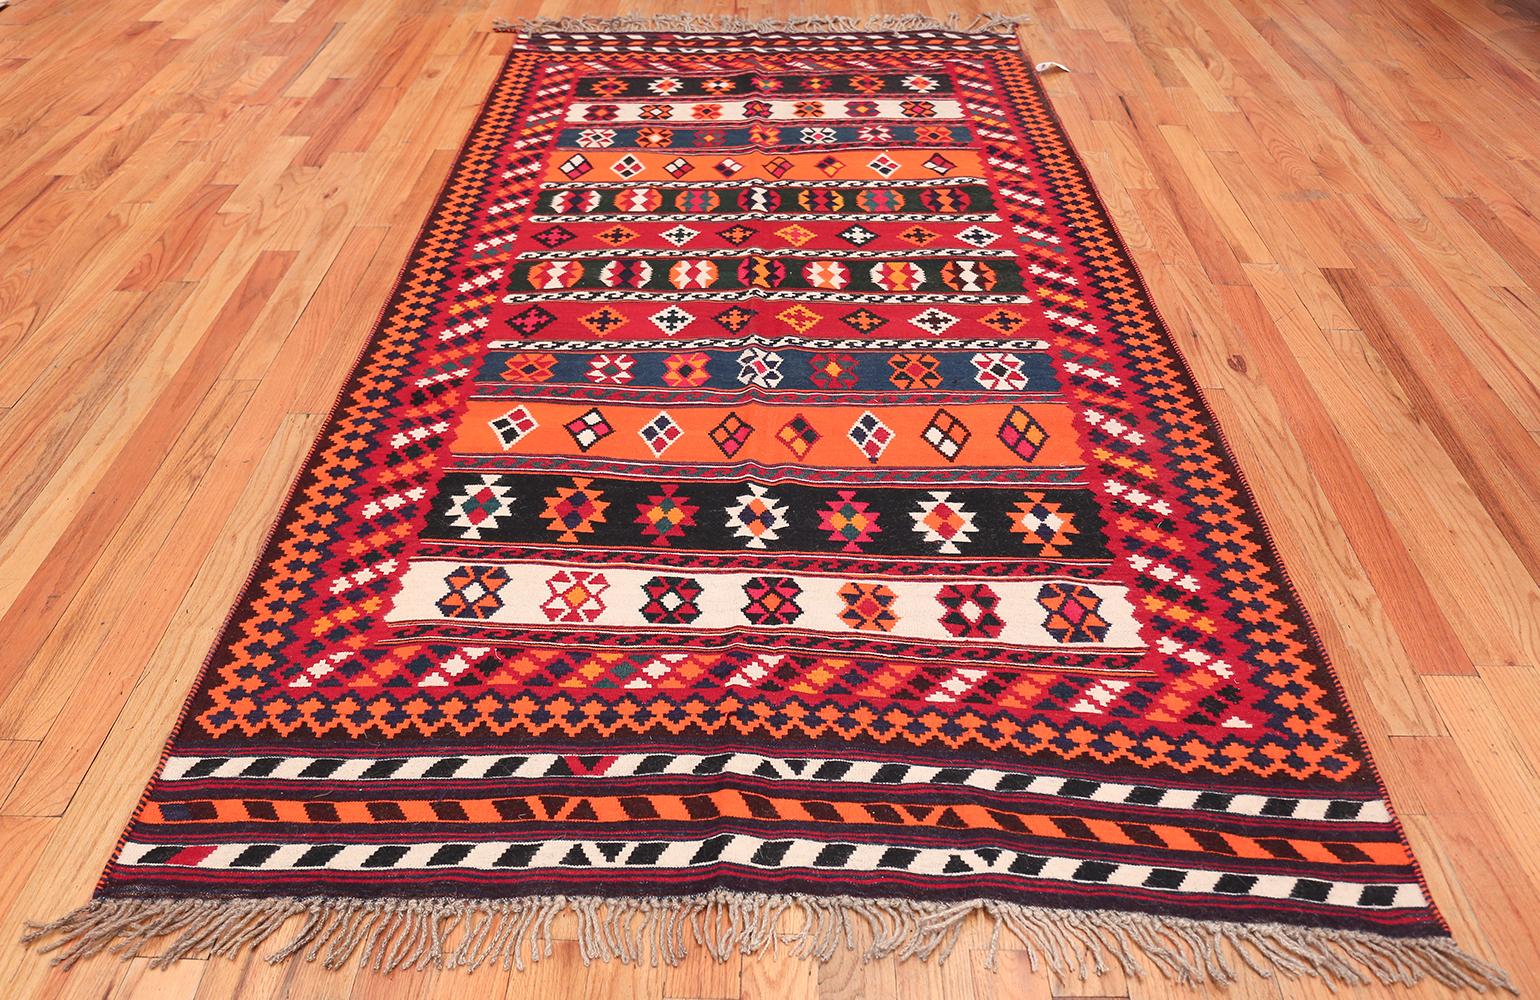 Vintage Ghashgai rug, Origin: Persia, circa mid-20th century. Size: 5 ft x 9 ft (1.52 m x 2.74 m)

A vibrant display of colors and patterns in this rug establishes a work of art that defies definition. Through this elegant medium, the artist creates